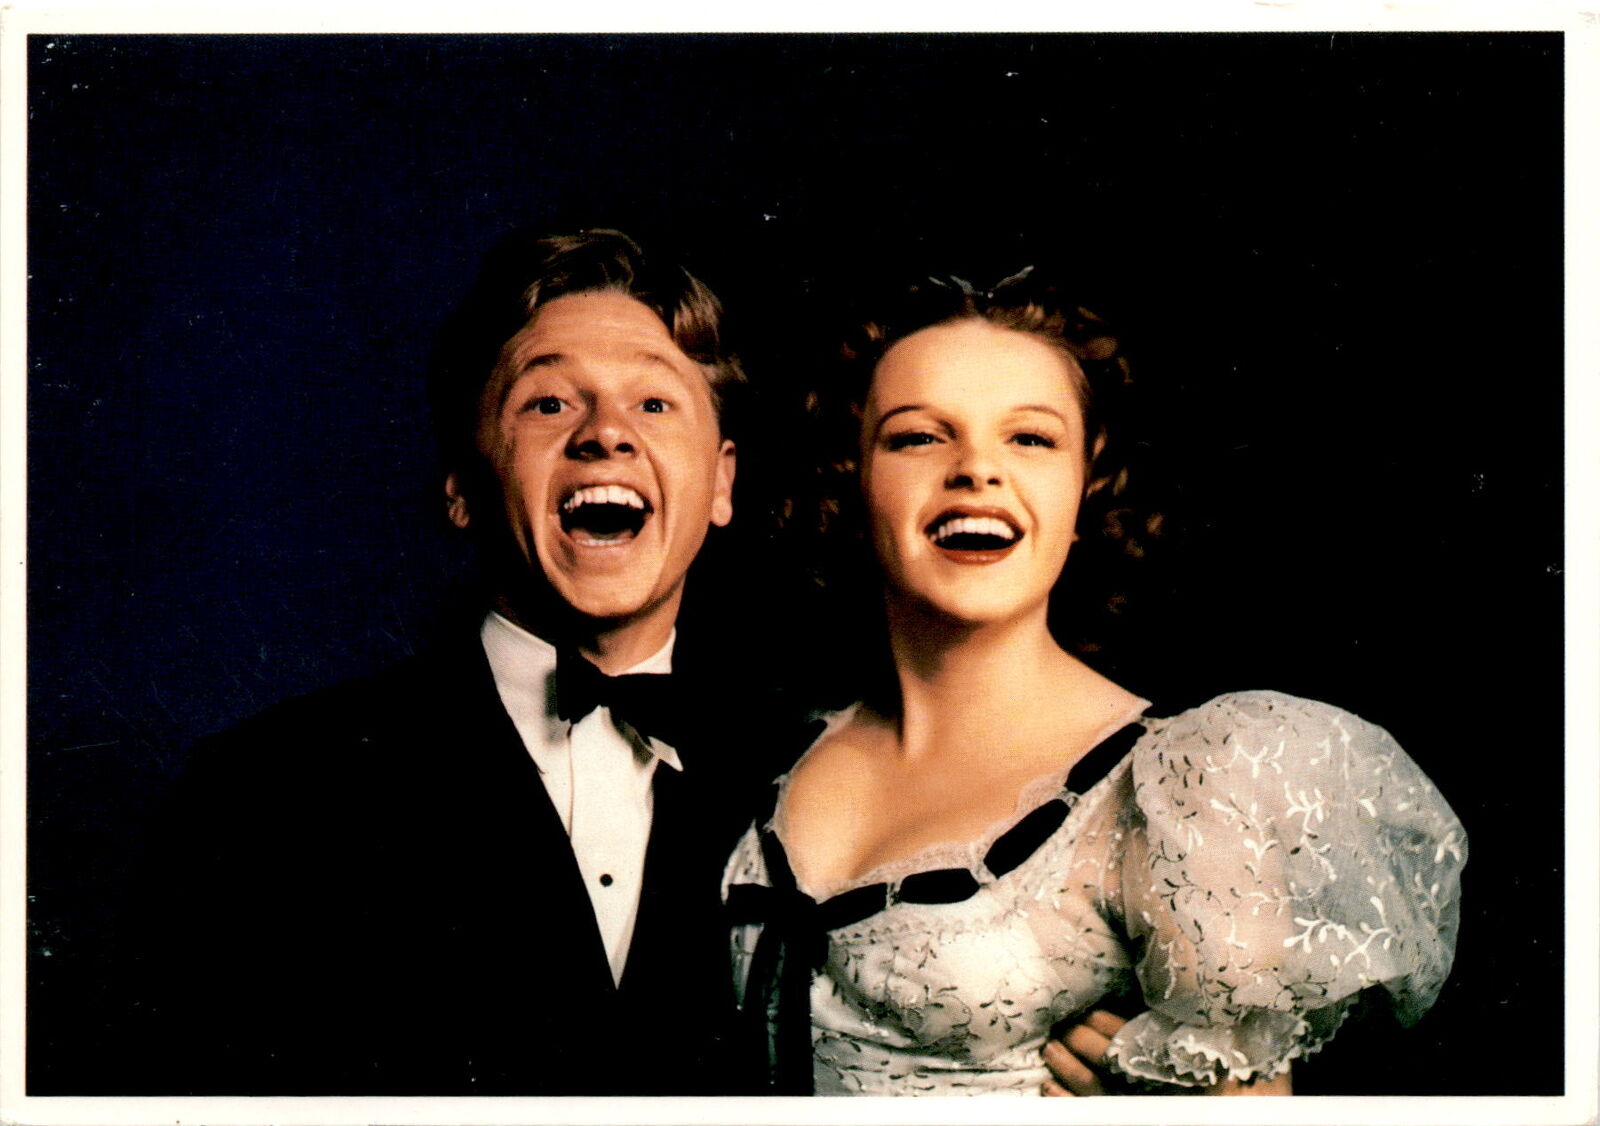 Iconic 1940s Photograph: Judy Garland and Mickey Rooney